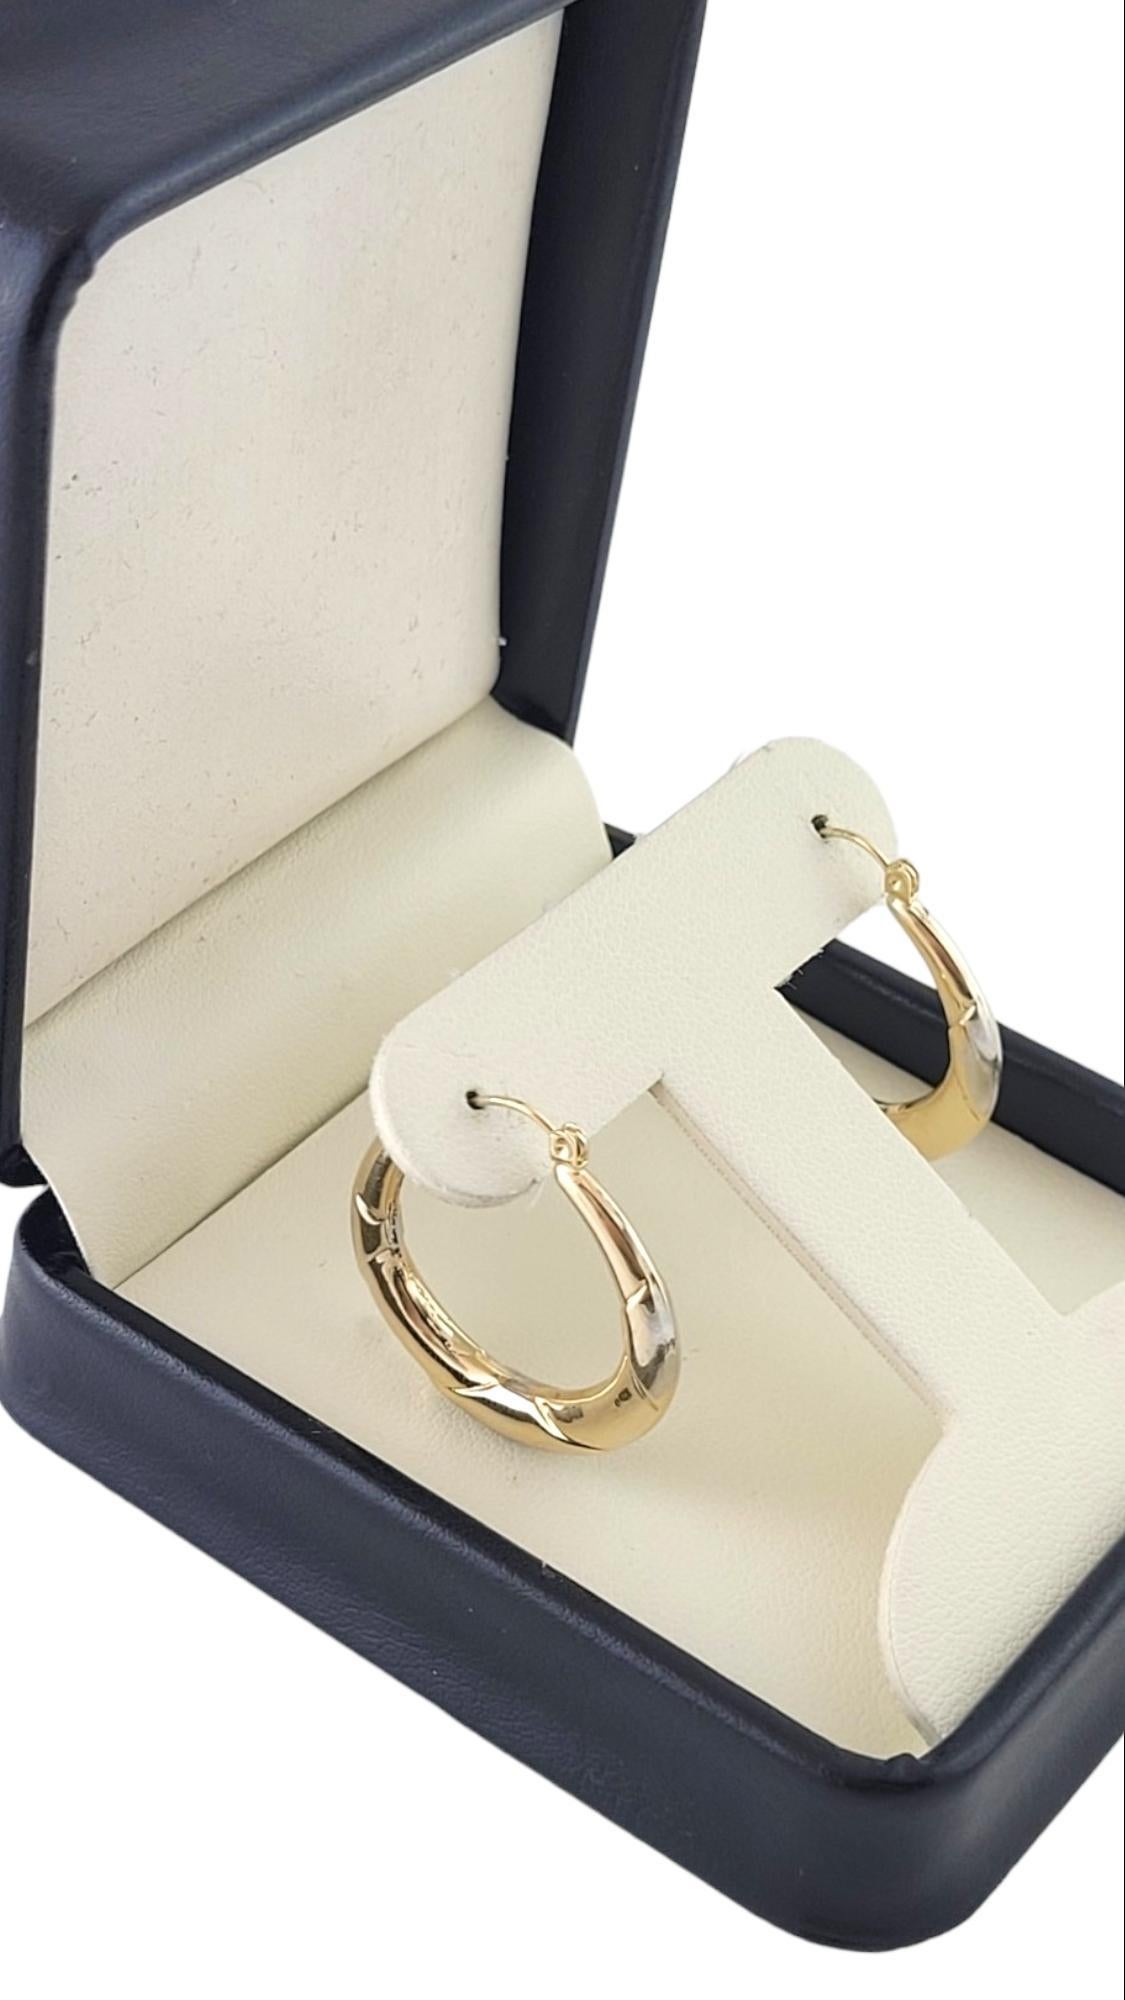 14K Yellow & White Gold Two Tone Hoop Earrings #15225 For Sale 2